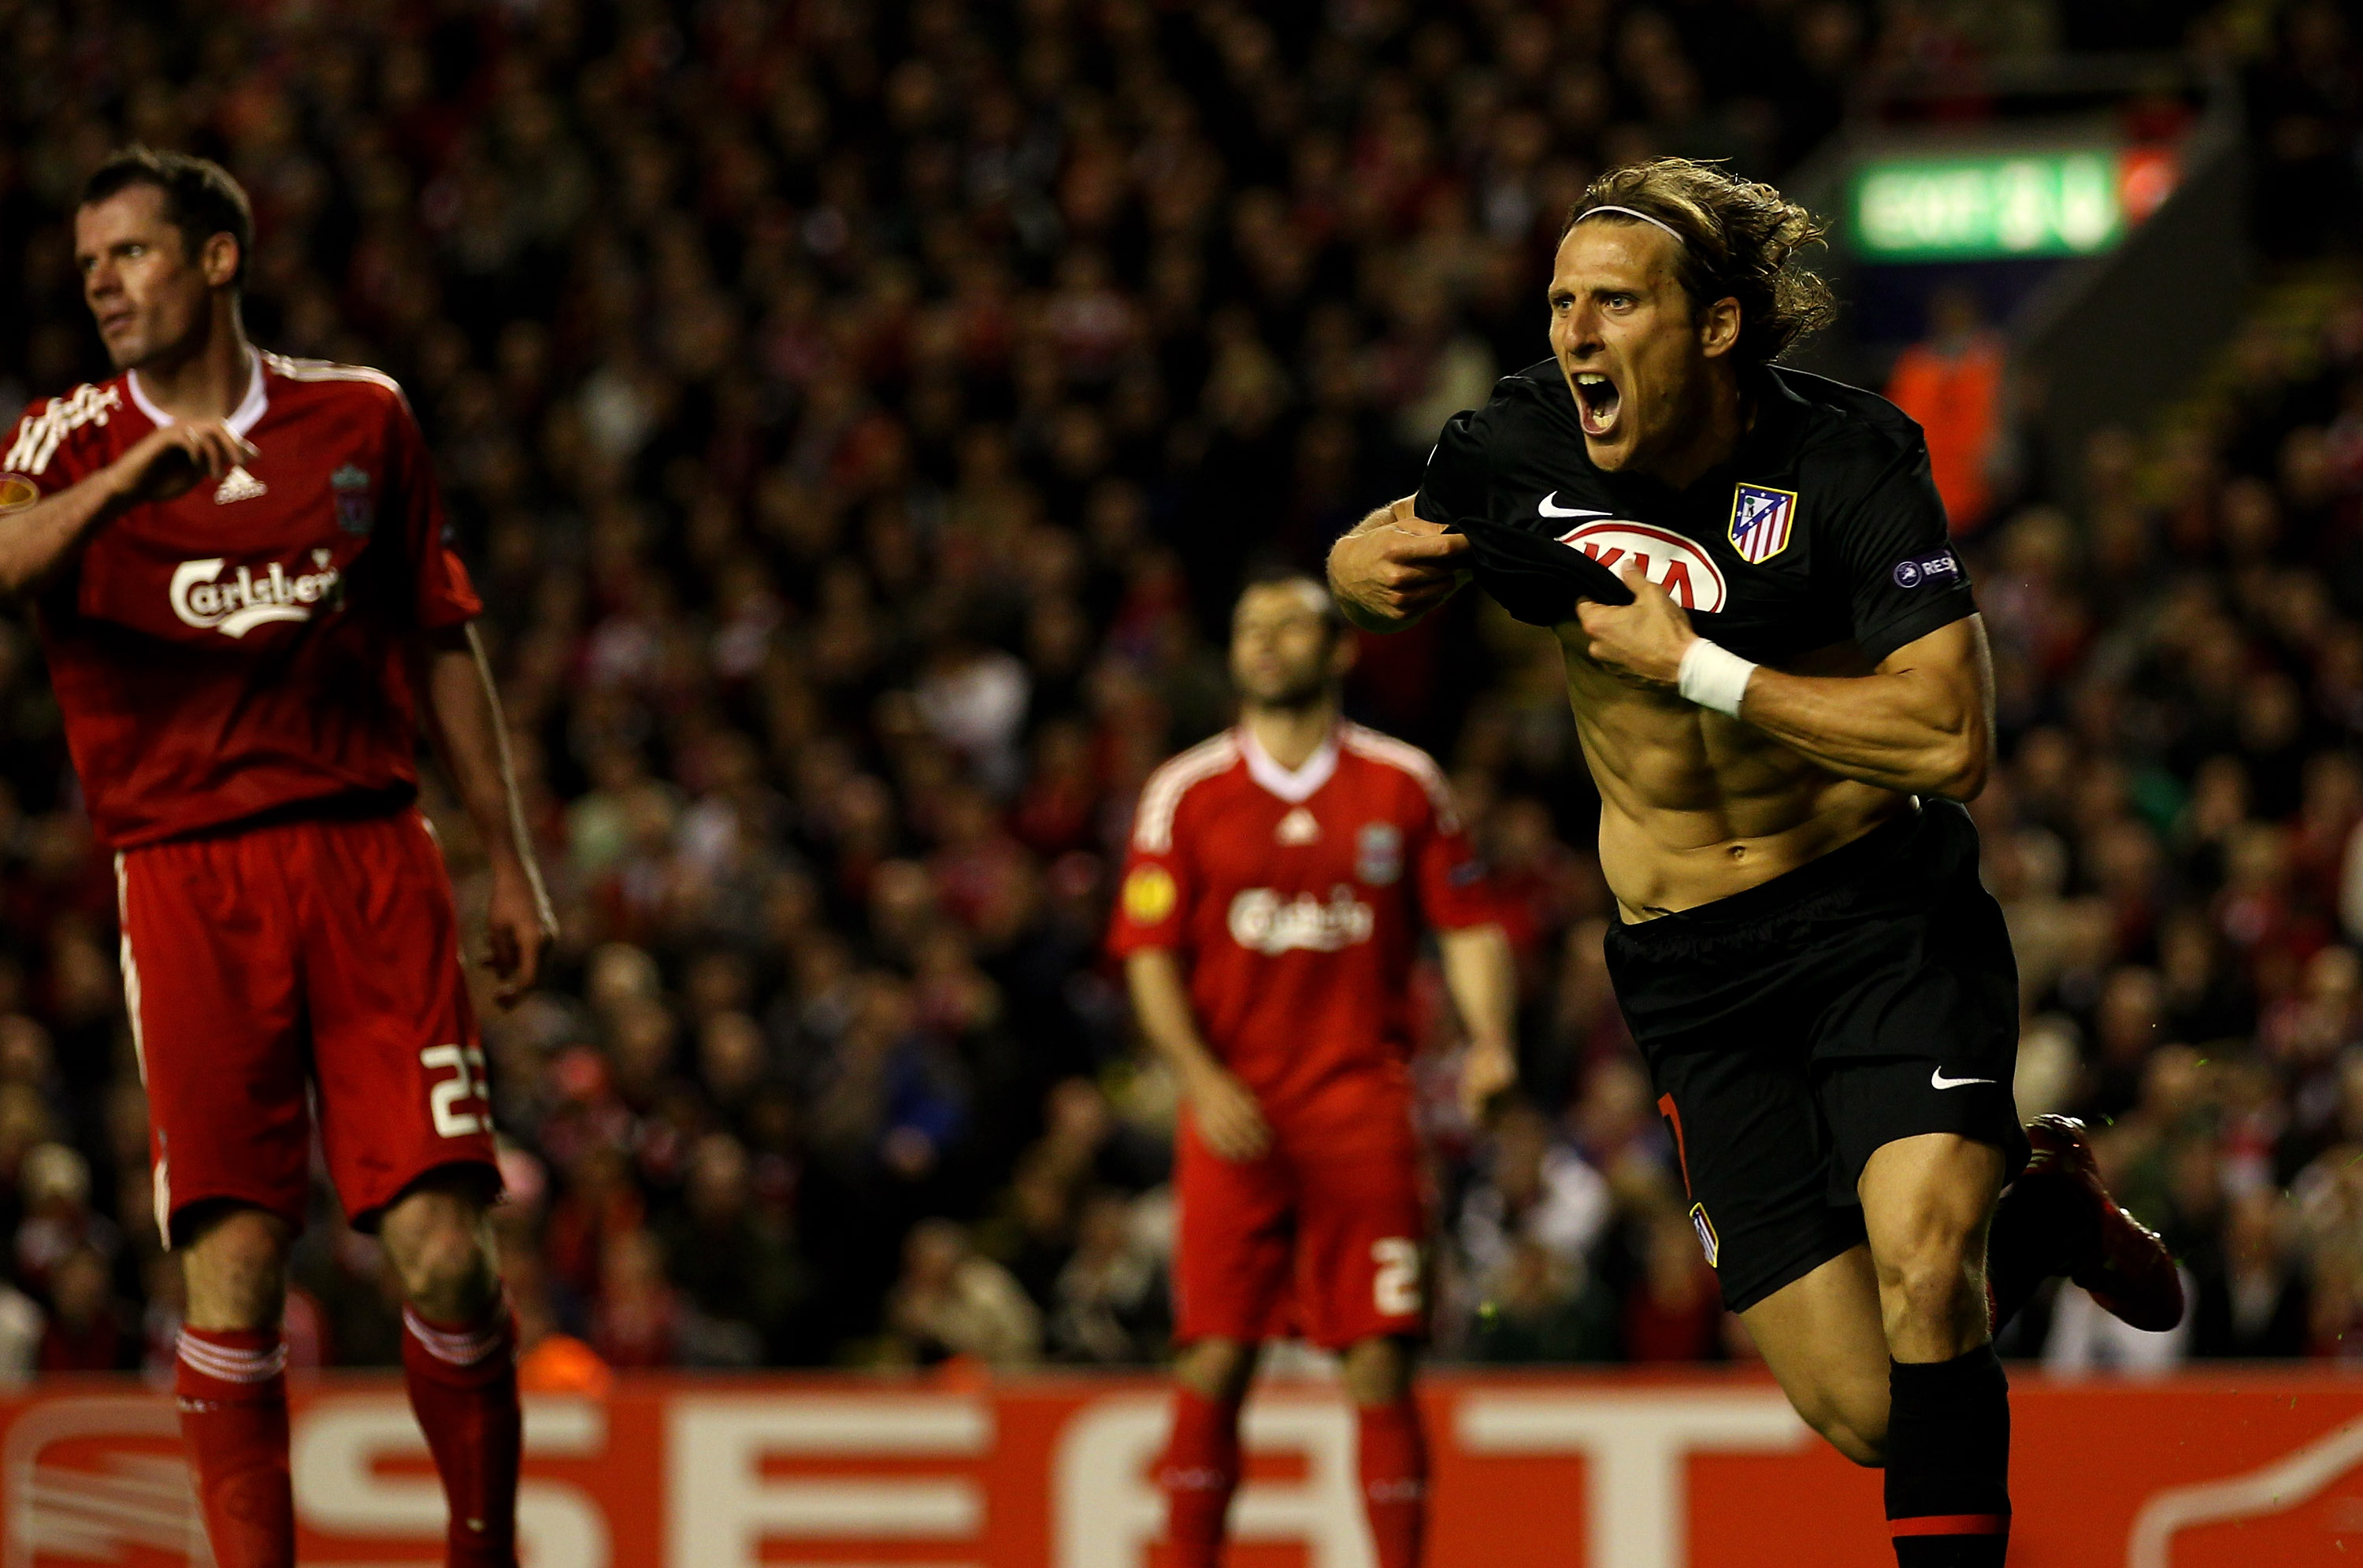 Diego Forlan celebrates his winning goal against Liverpool in 2010.